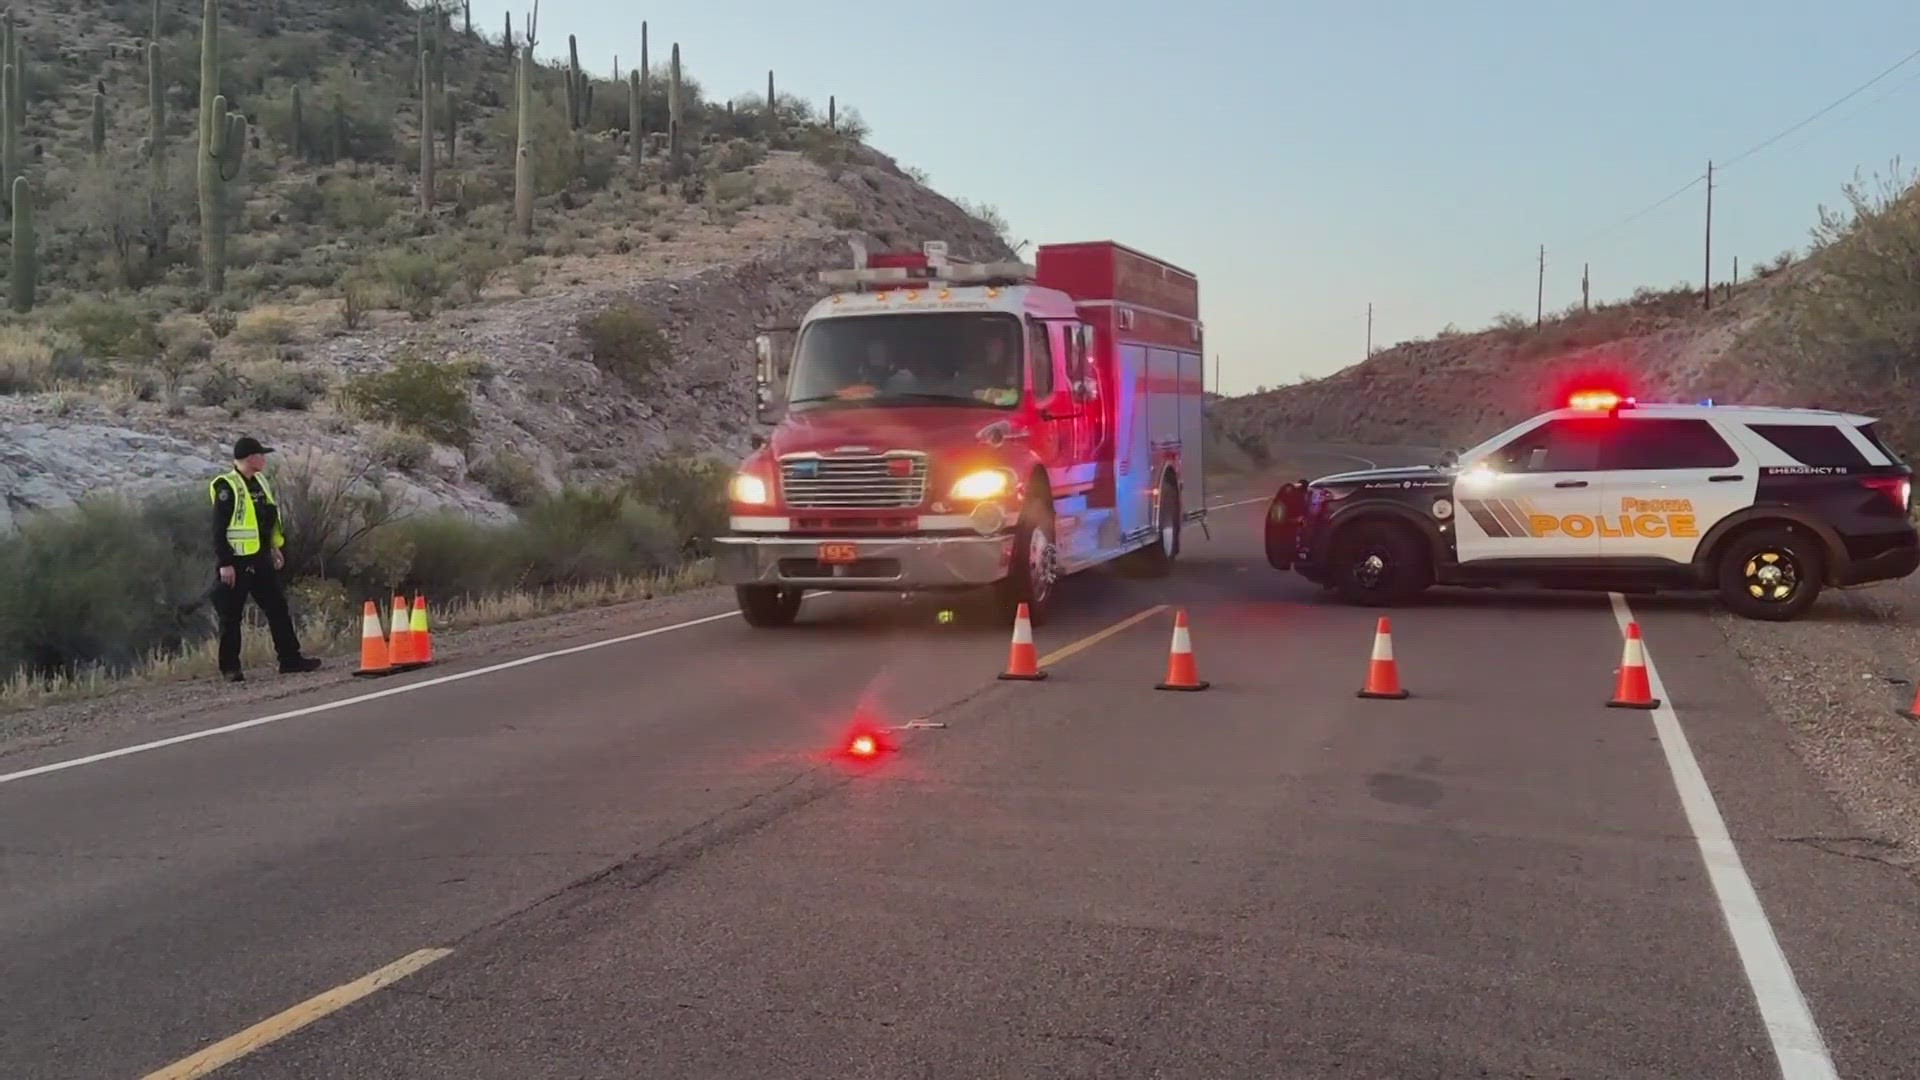 The crash happened near the access road to one of Arizona's most popular lakes and shut down a road for many hours on Saturday. Watch the video for more details.